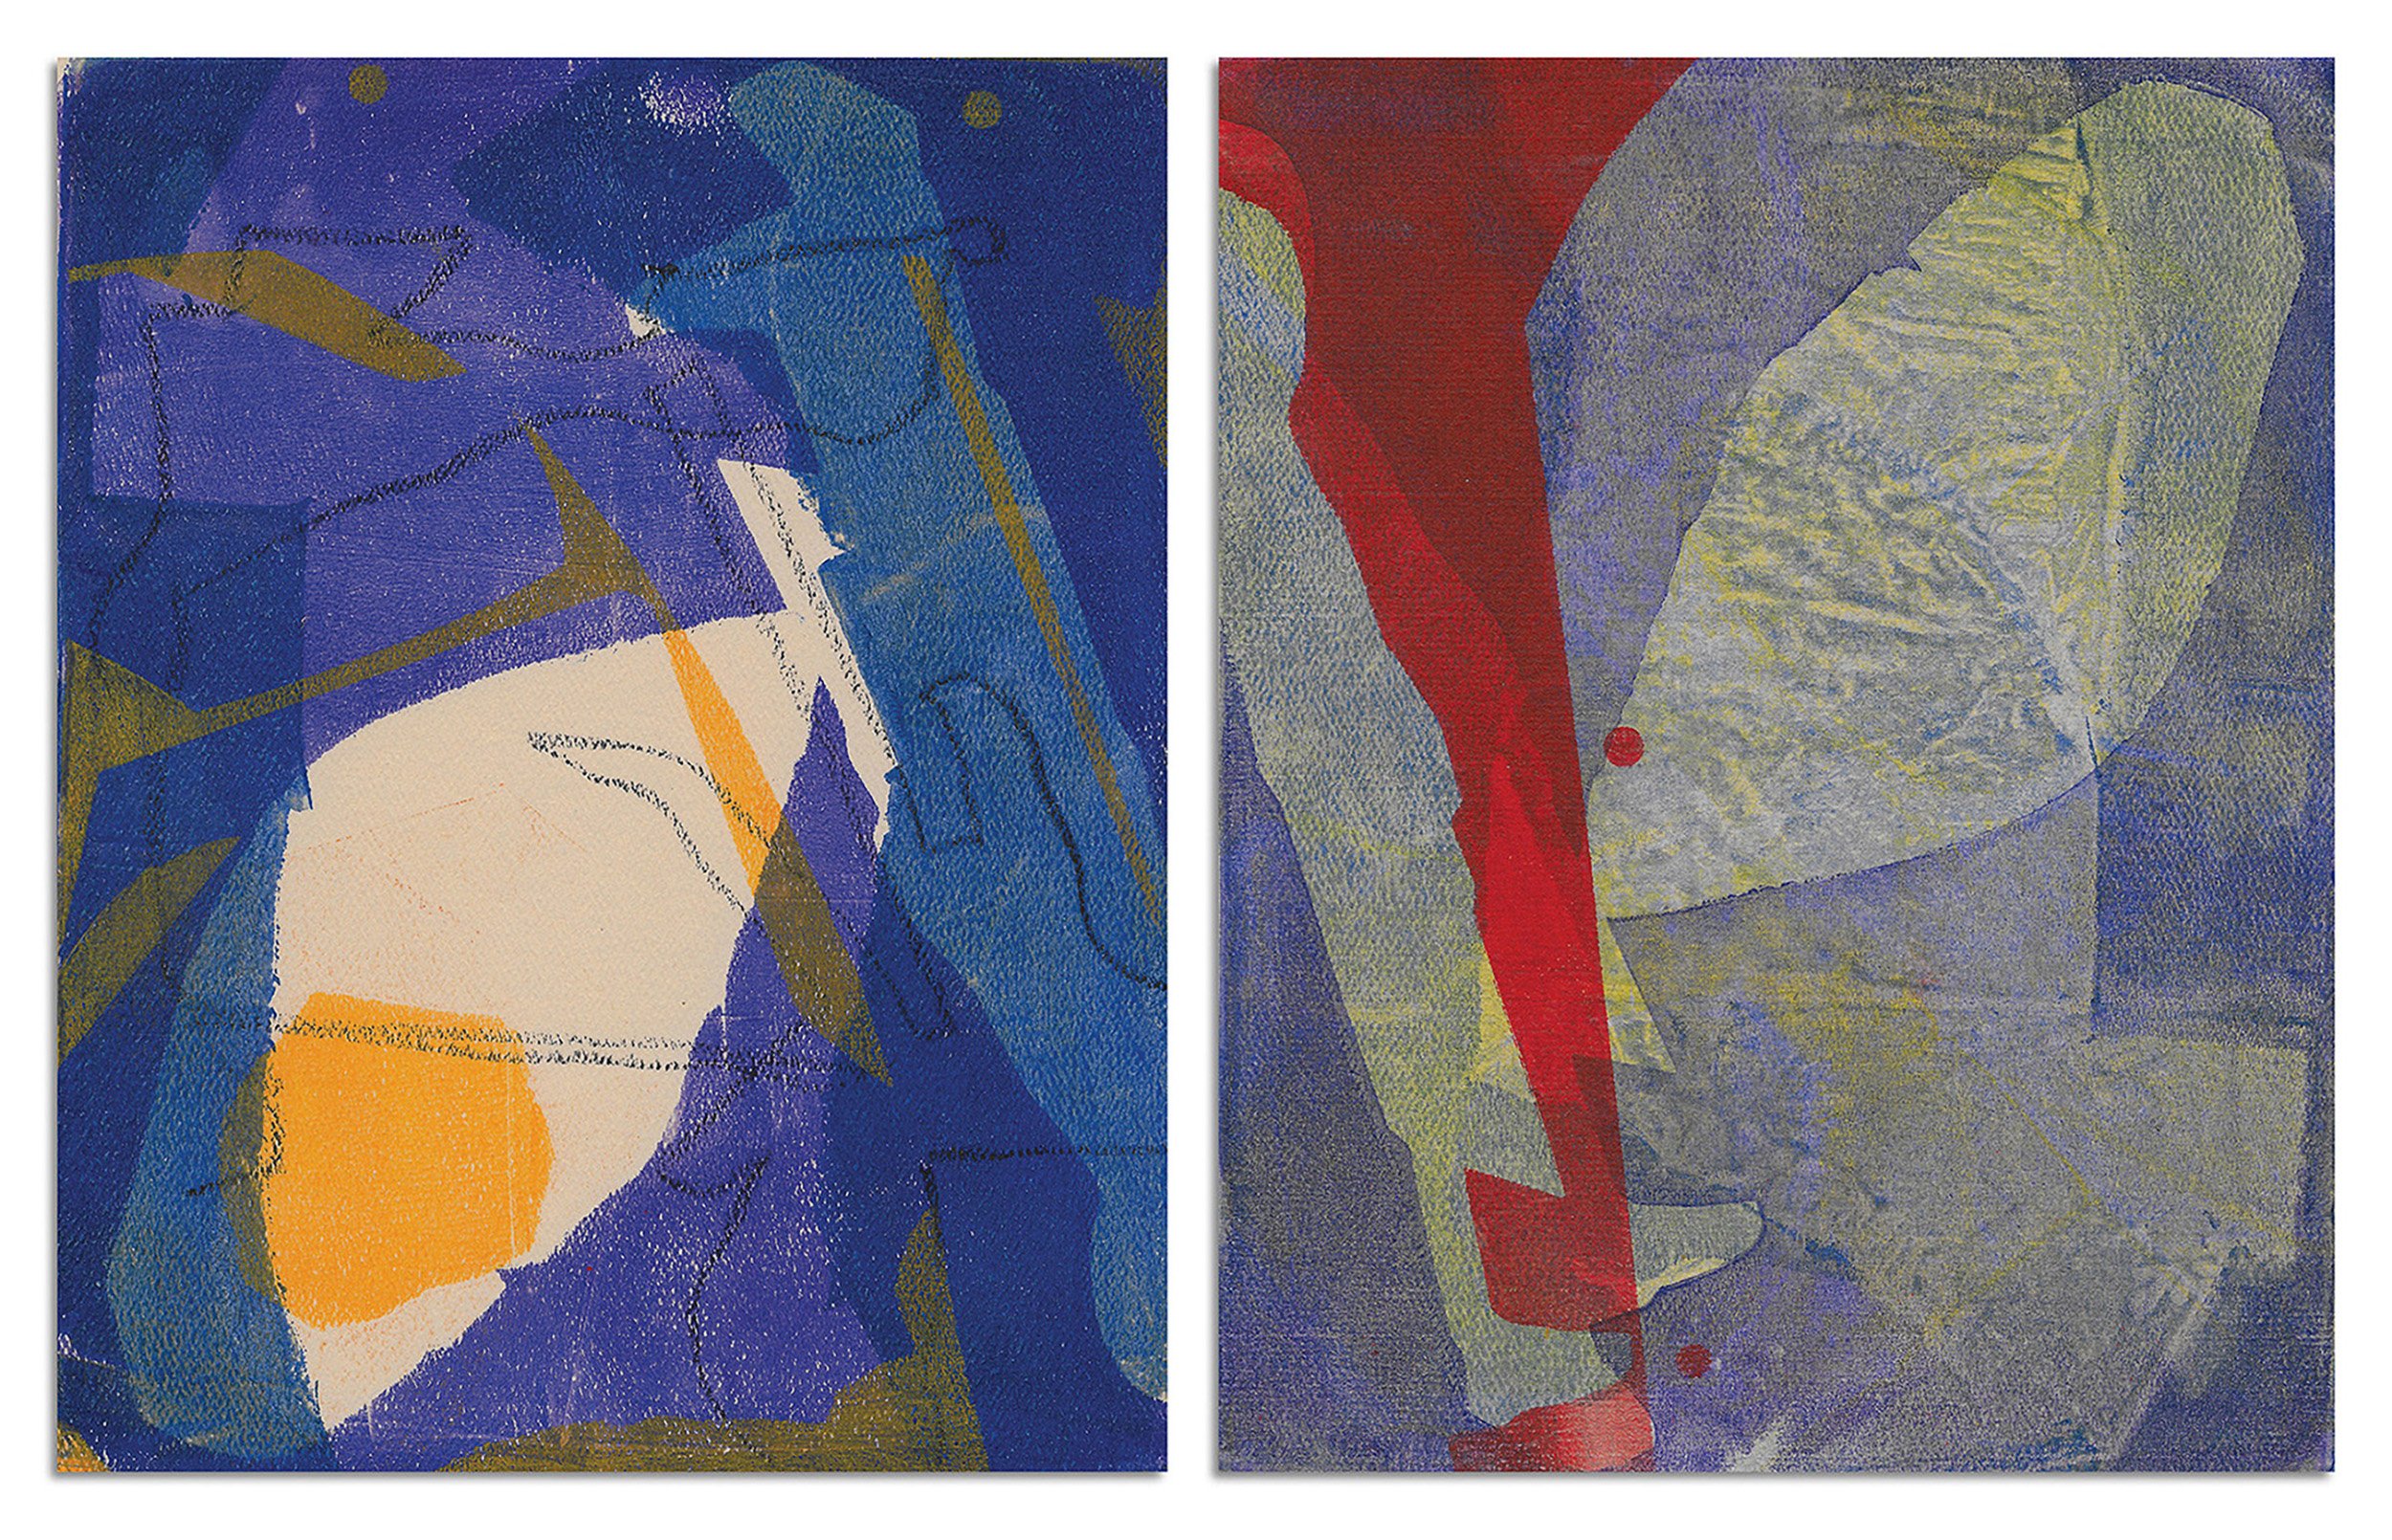    Forced Dyad   (diptych)  Acrylic monotypes and oil crayon on felted paper, 16 x 24 inches 